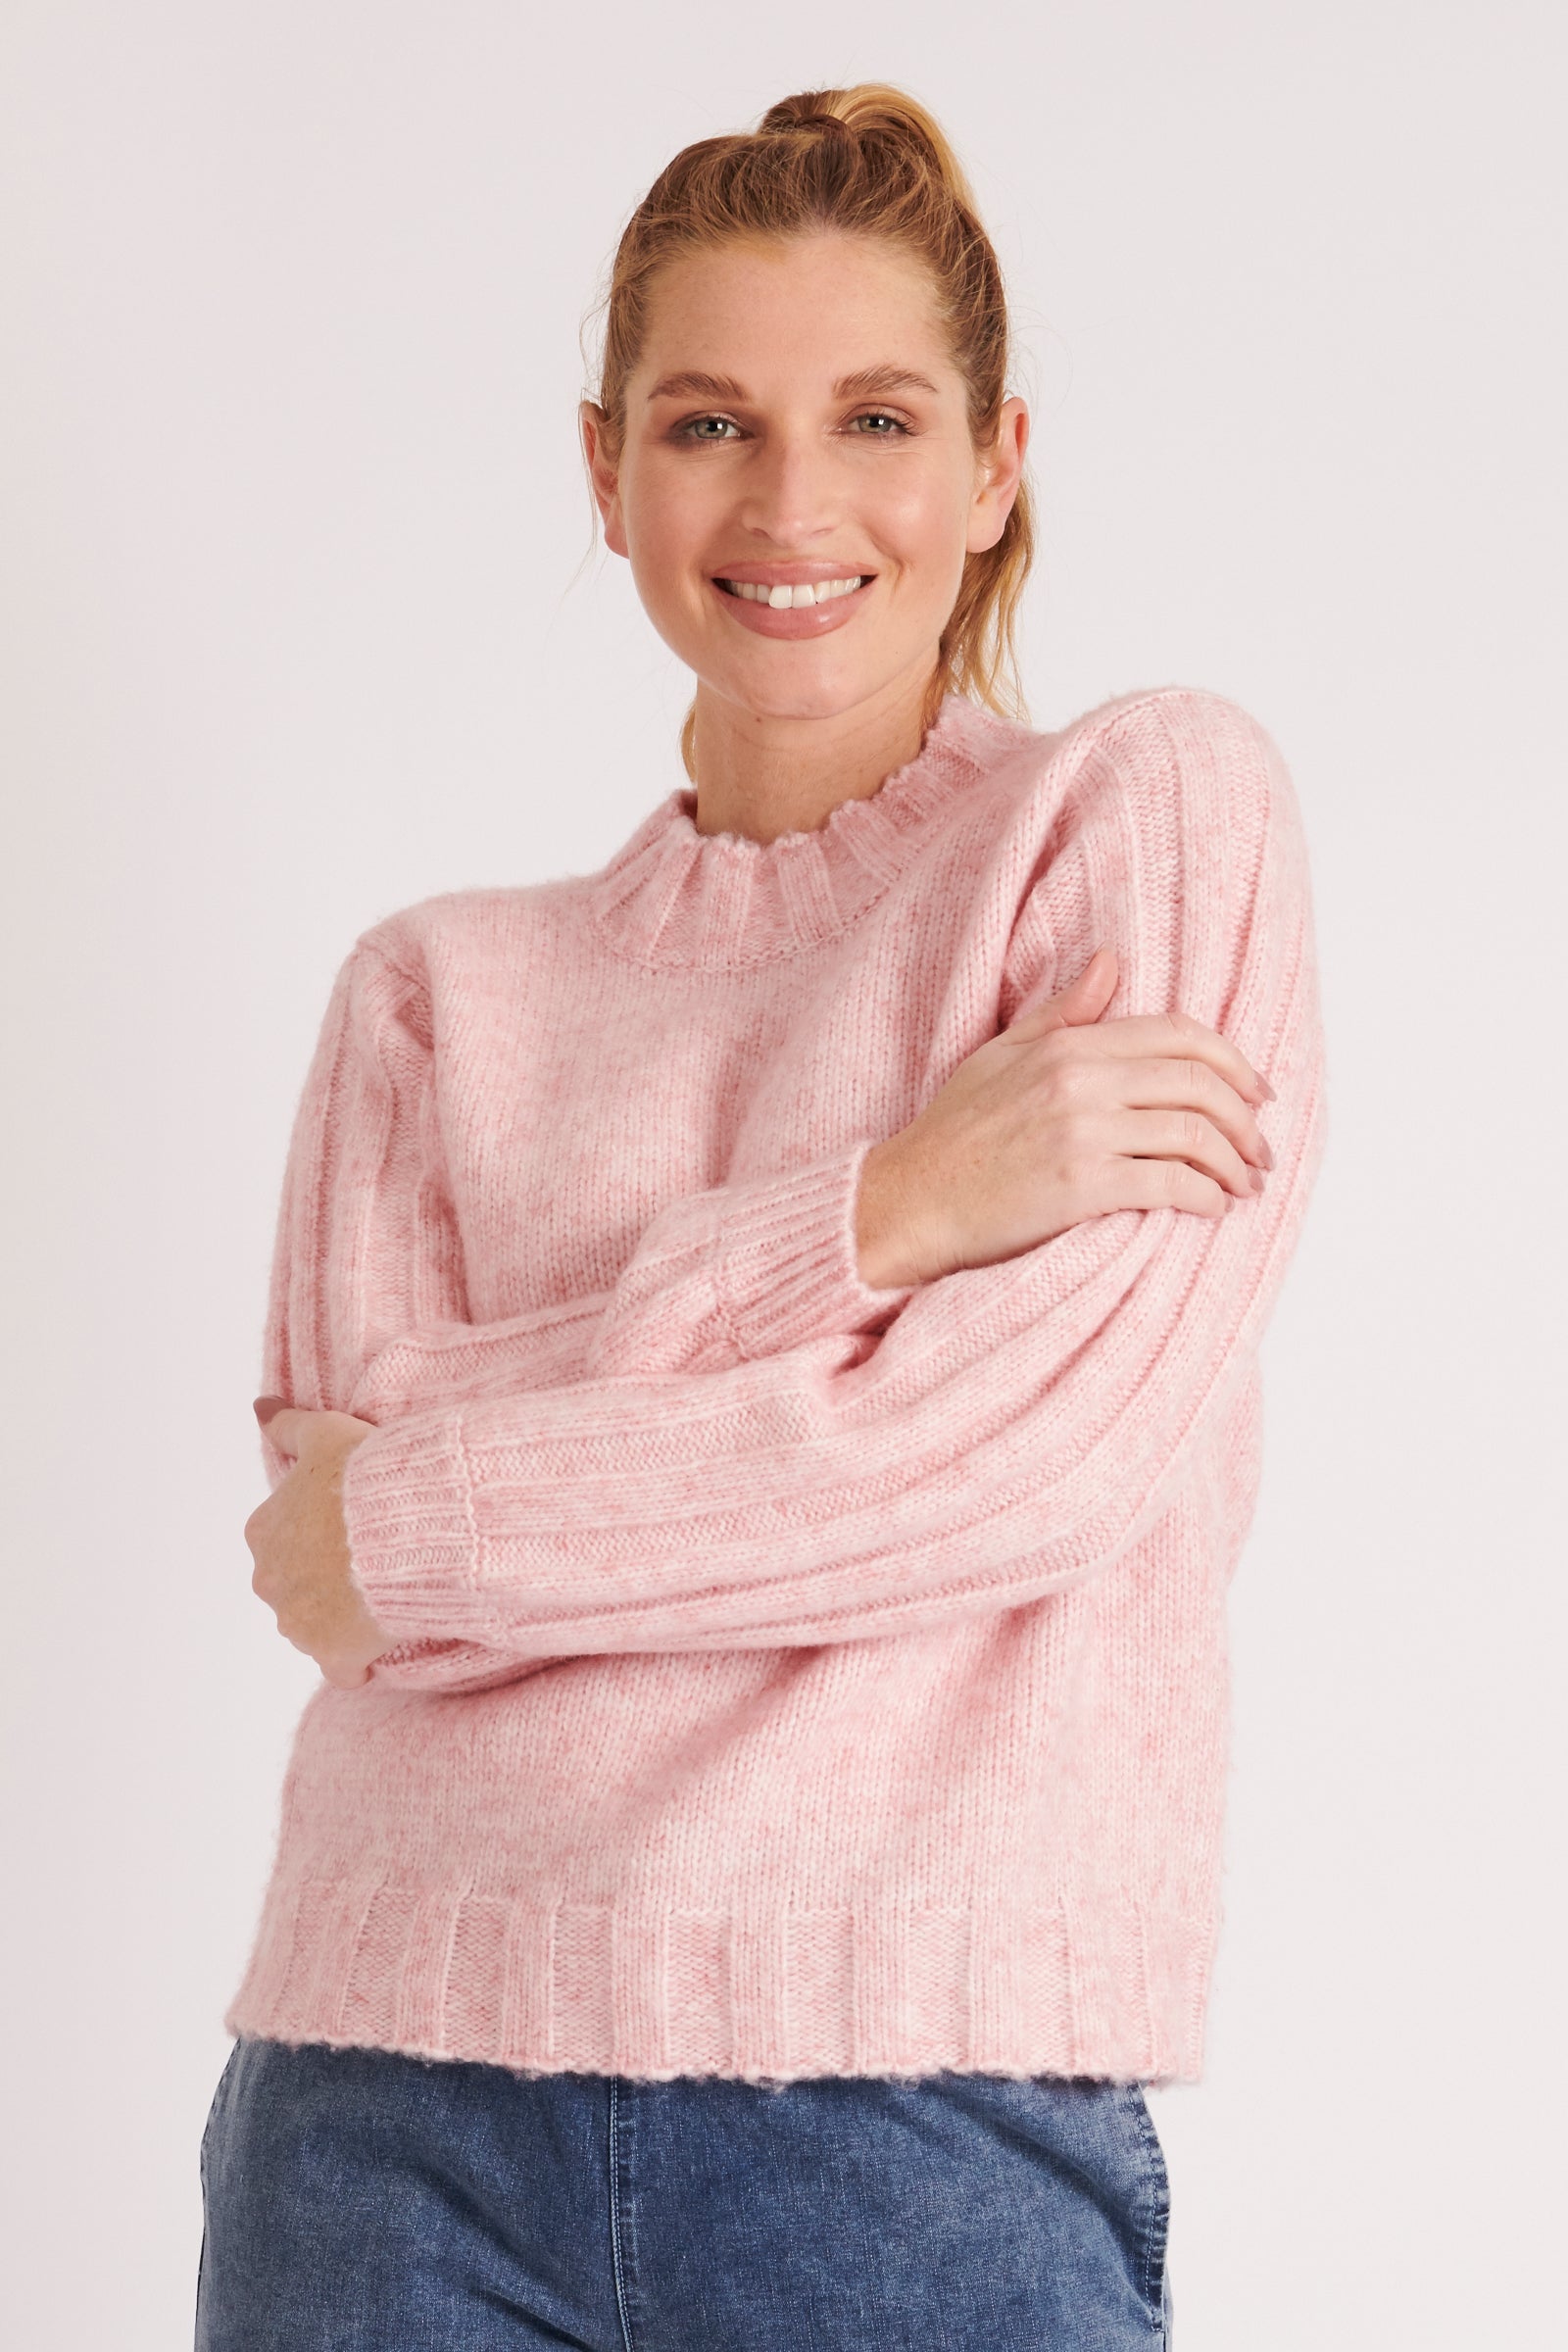 Rib Sleeve Jumper - Light Pink-Knitwear & Jumpers-A Little Birdie Told Me-The Bay Room